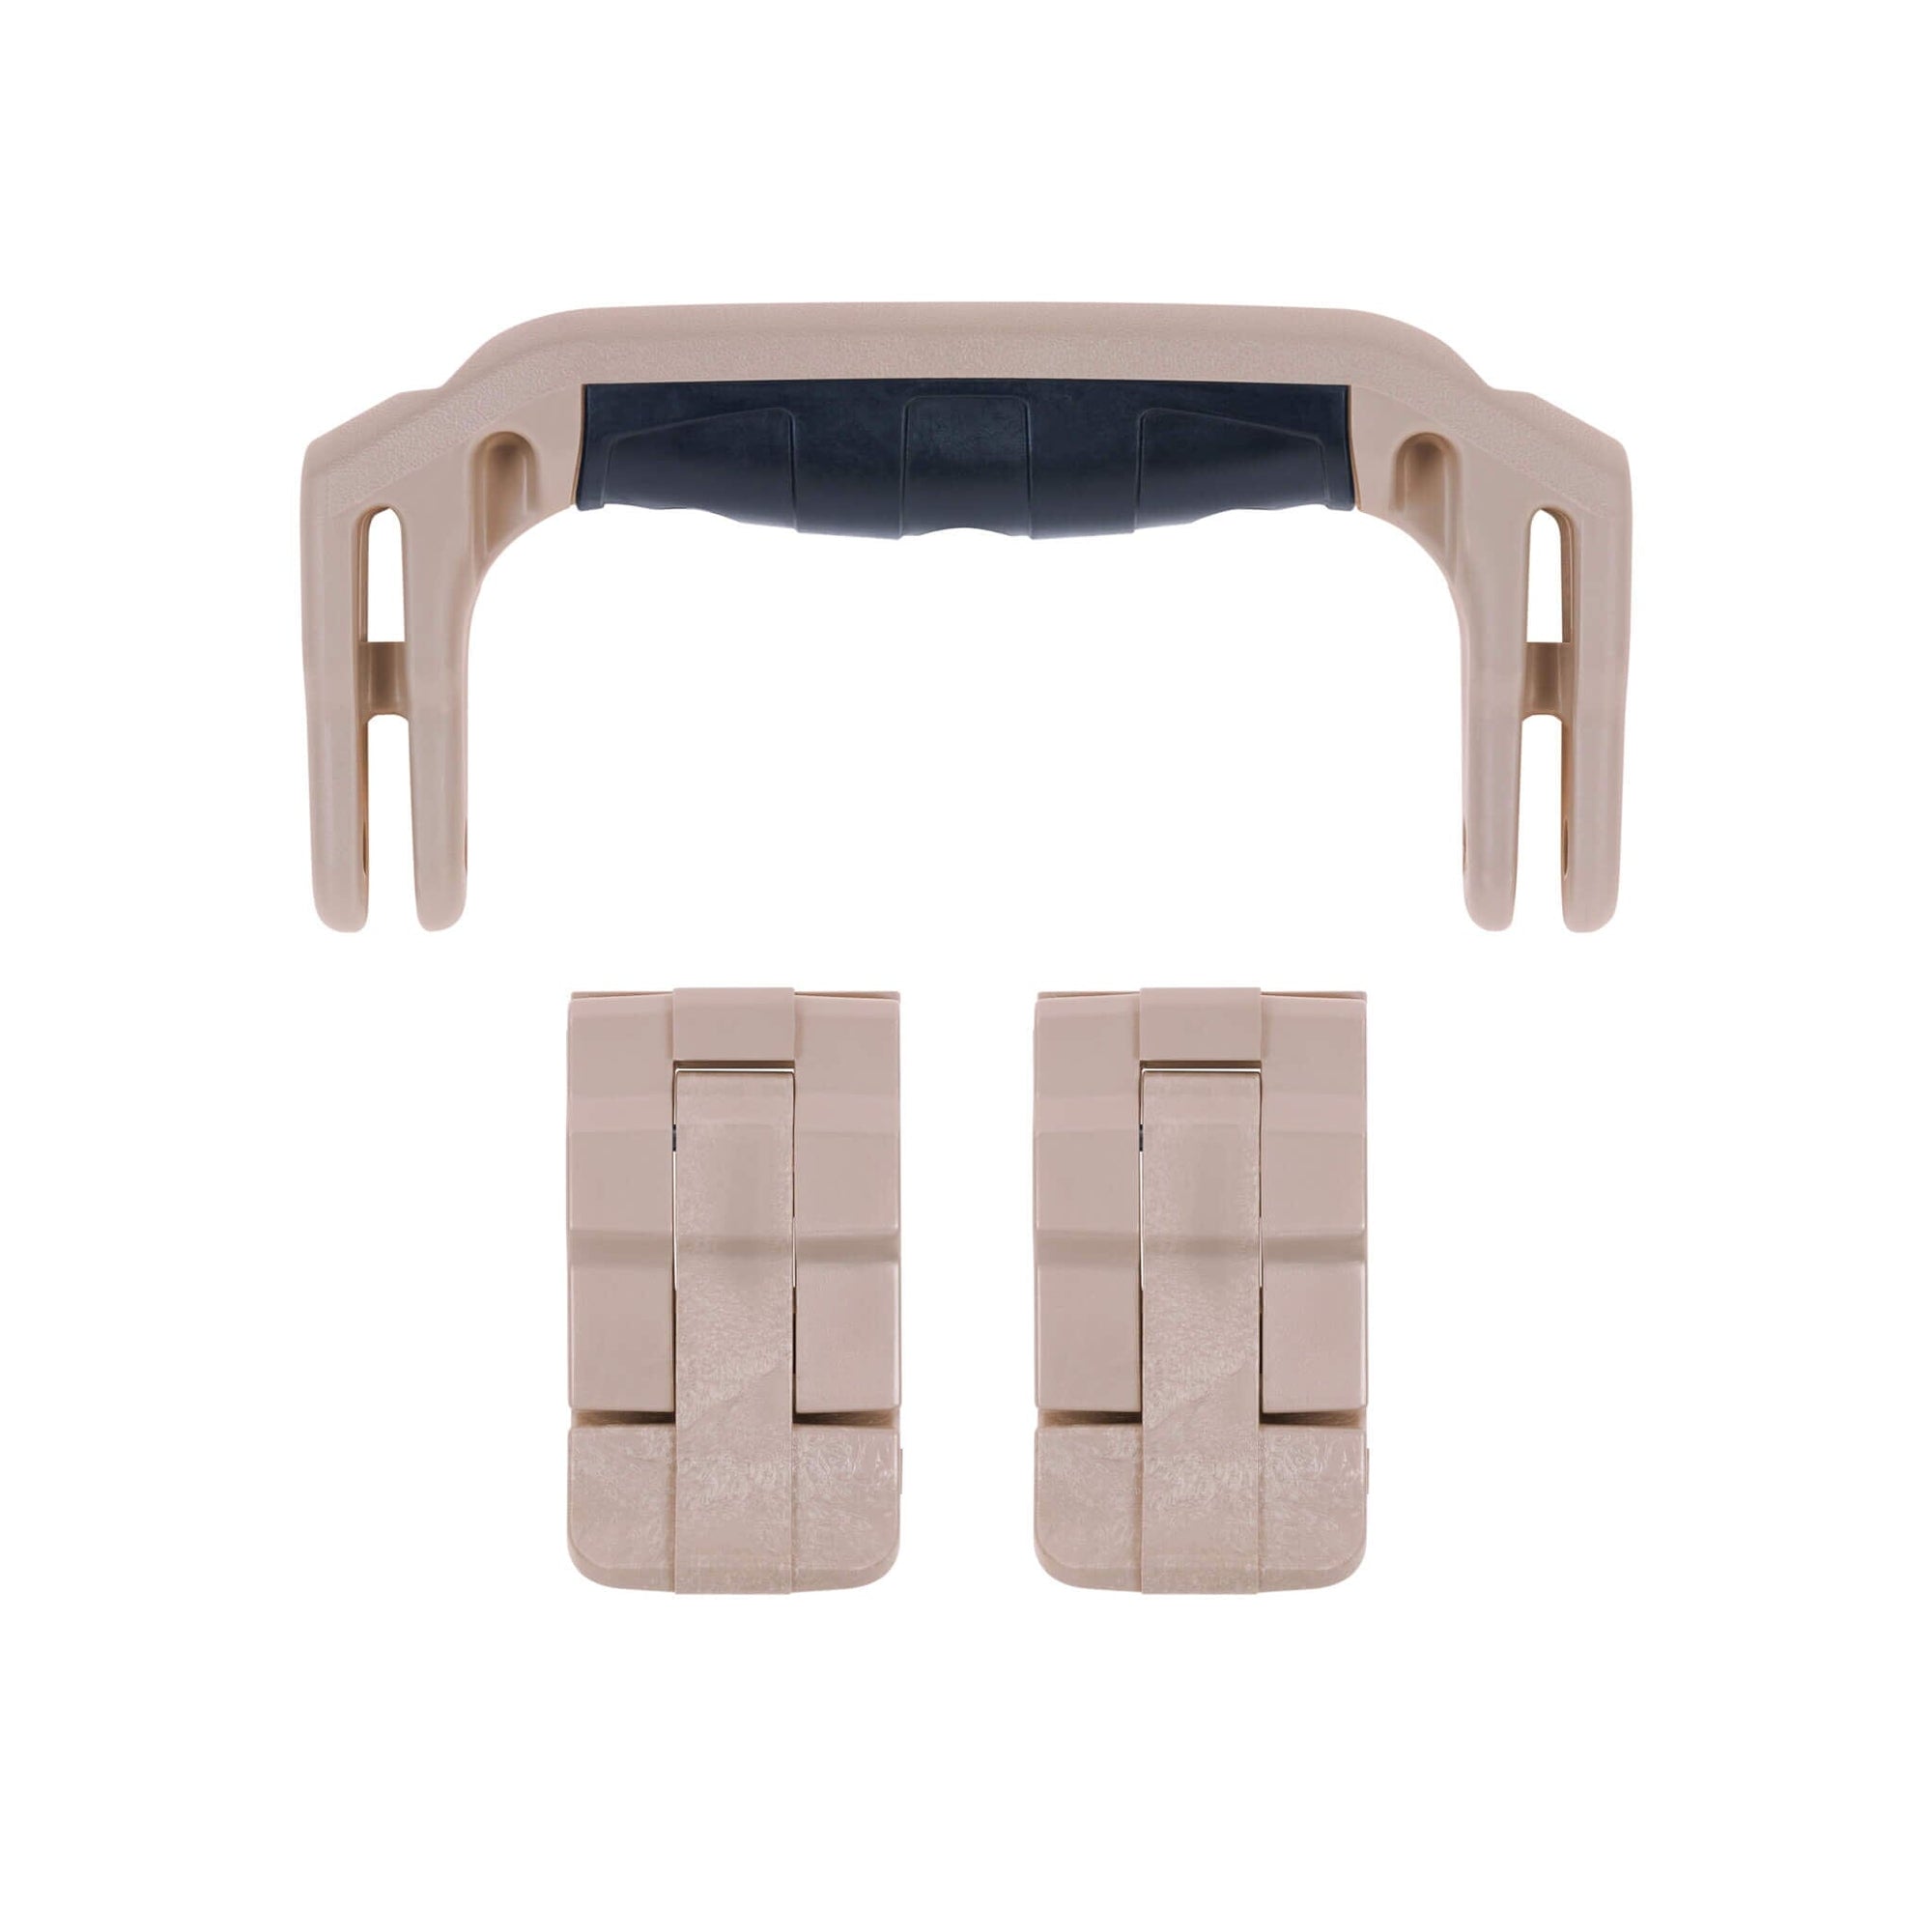 Pelican 1400 Replacement Handle & Latches, Desert Tan (Set of 1 Handle, 2 Latches) ColorCase 